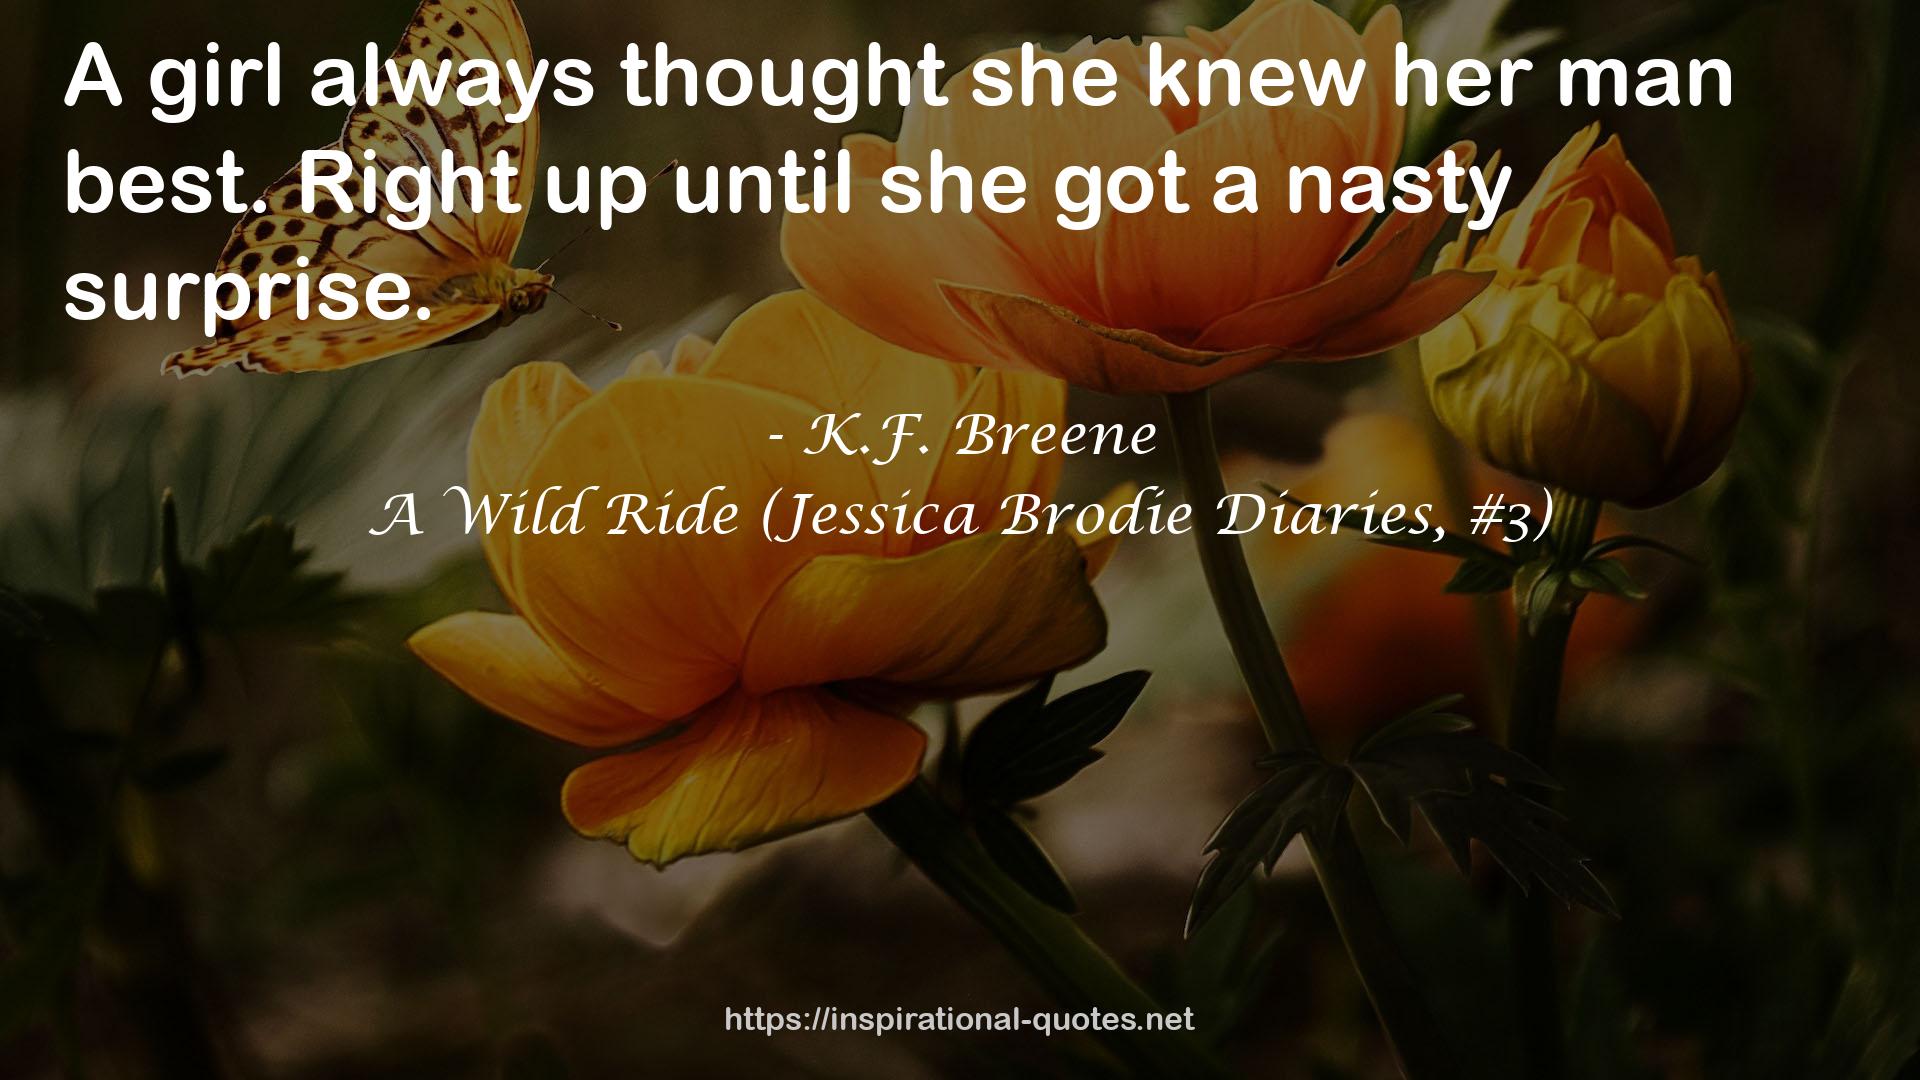 A Wild Ride (Jessica Brodie Diaries, #3) QUOTES